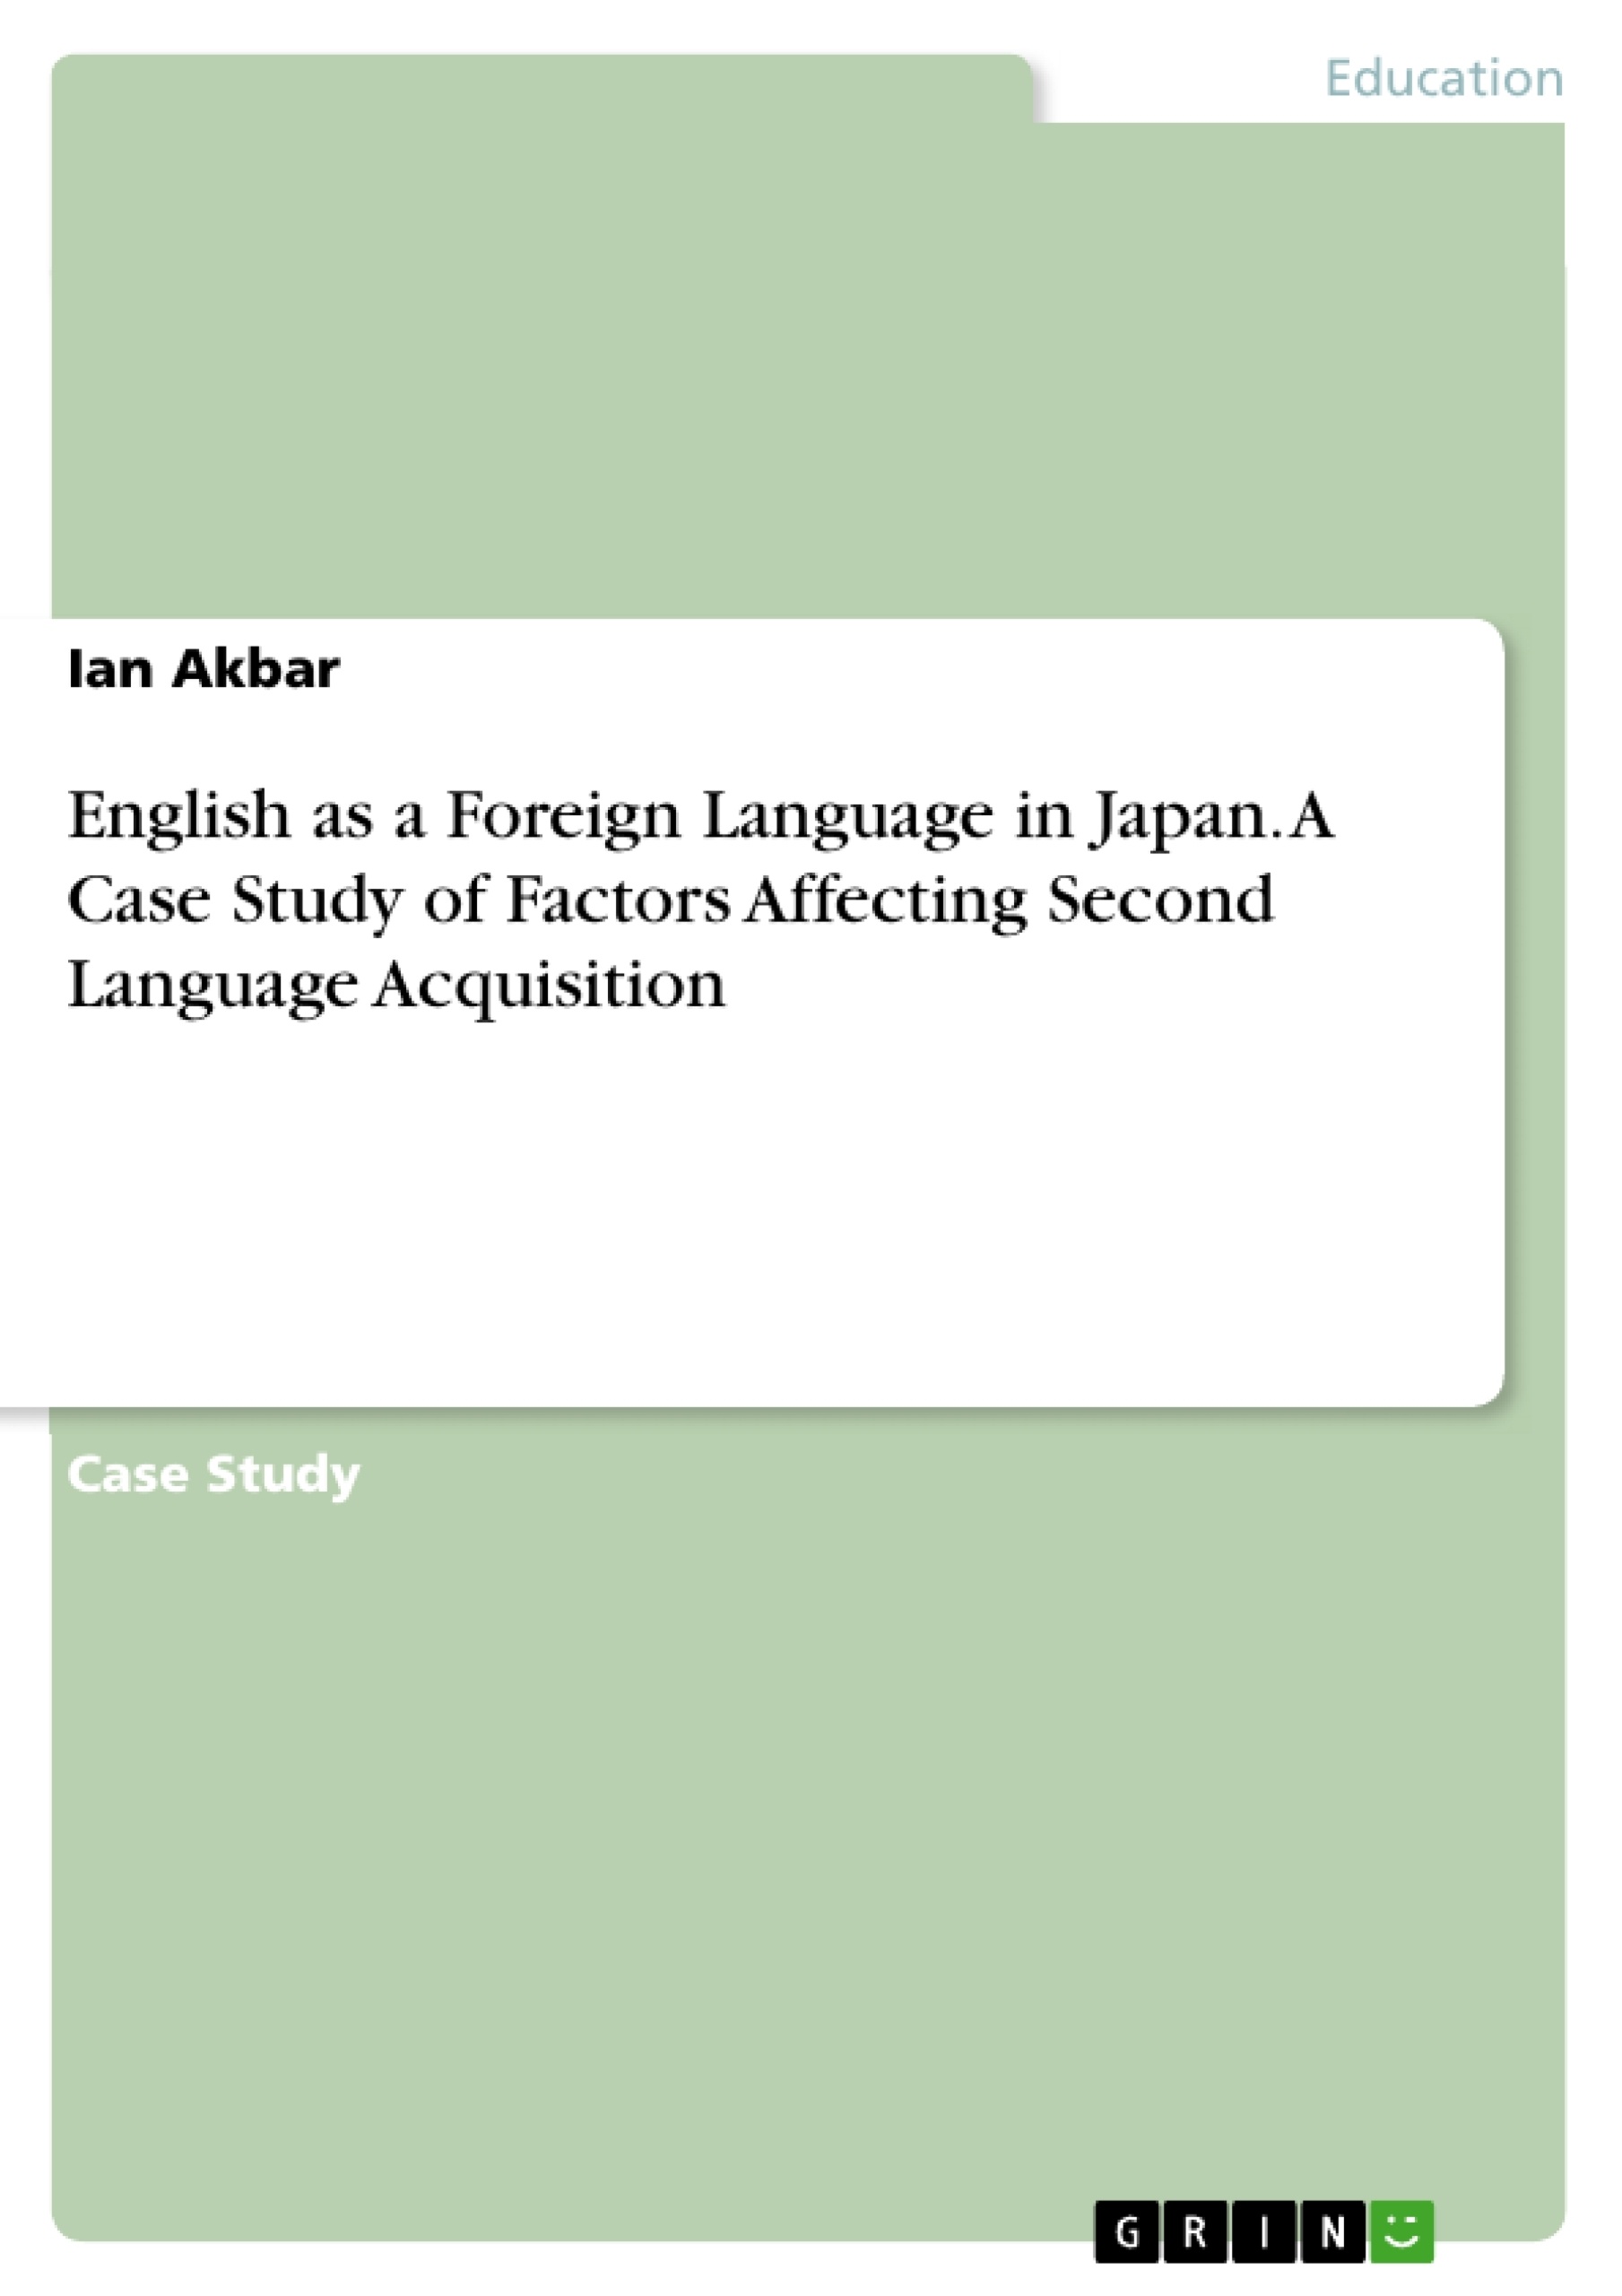 Title: English as a Foreign Language in Japan.  A Case Study of Factors Affecting Second Language Acquisition